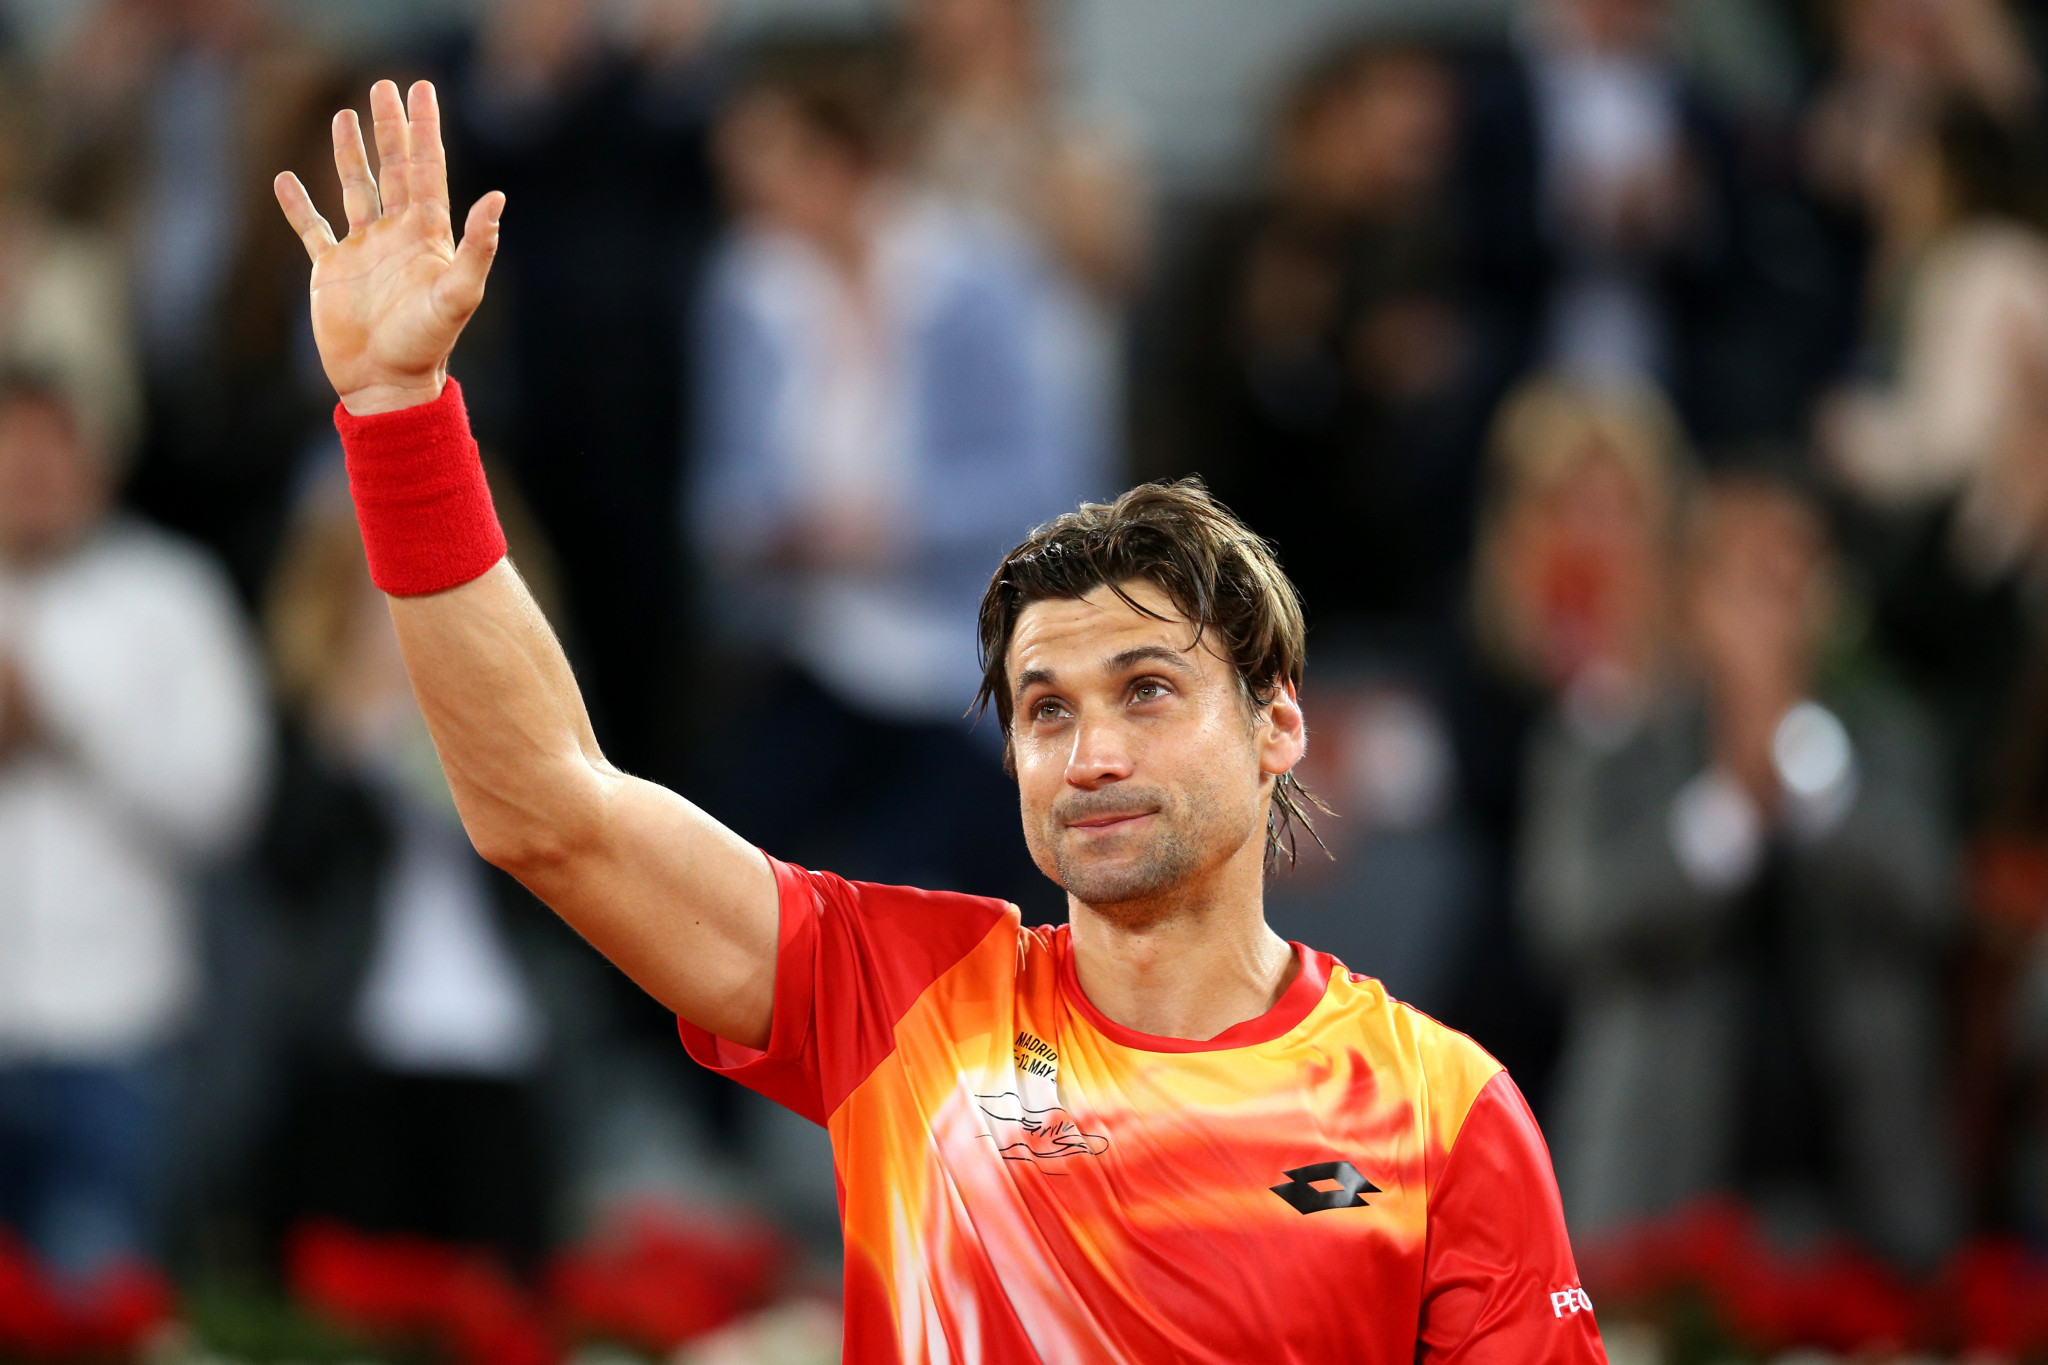 Ferrer appointed tournament director for Davis Cup Finals